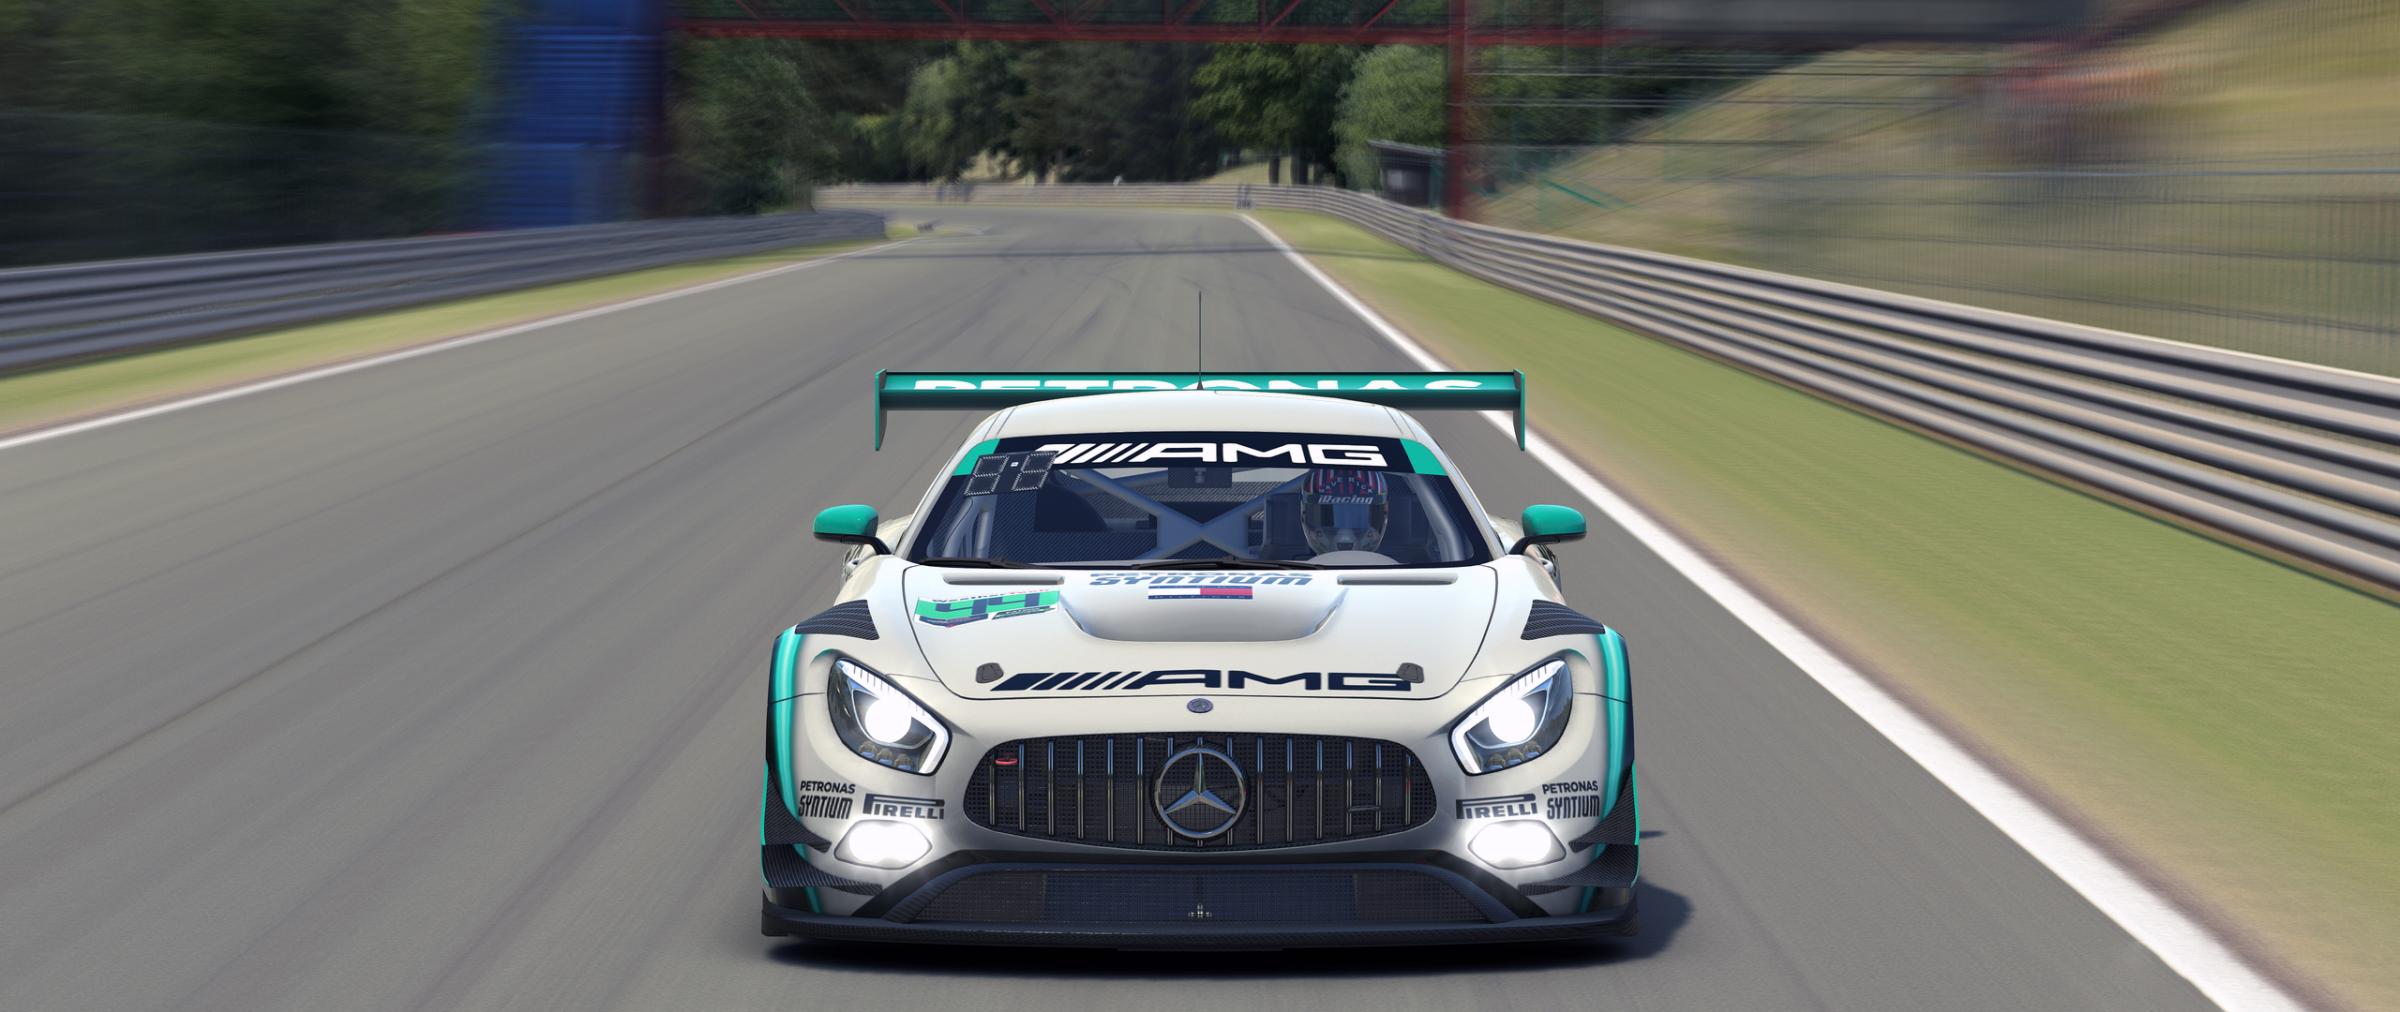 Preview of AMG Petronas Motorsport (2019) - Petronas by Timothy Collier